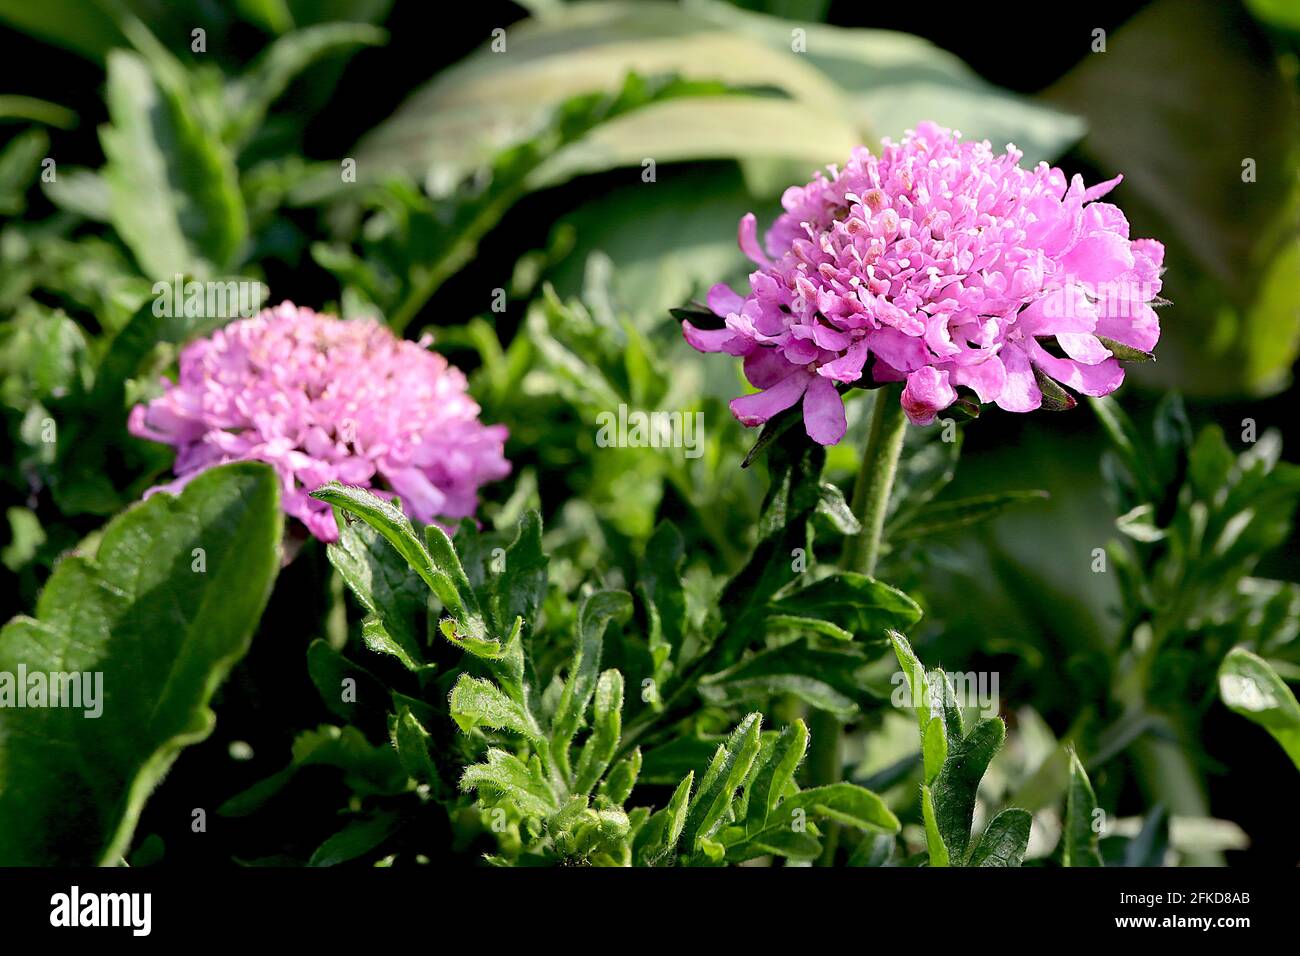 Scabiosa columbaria ‘Pink Mist’ Scabious Pink Mist – pink pincushion flower with bending stem, April, England, UK Stock Photo